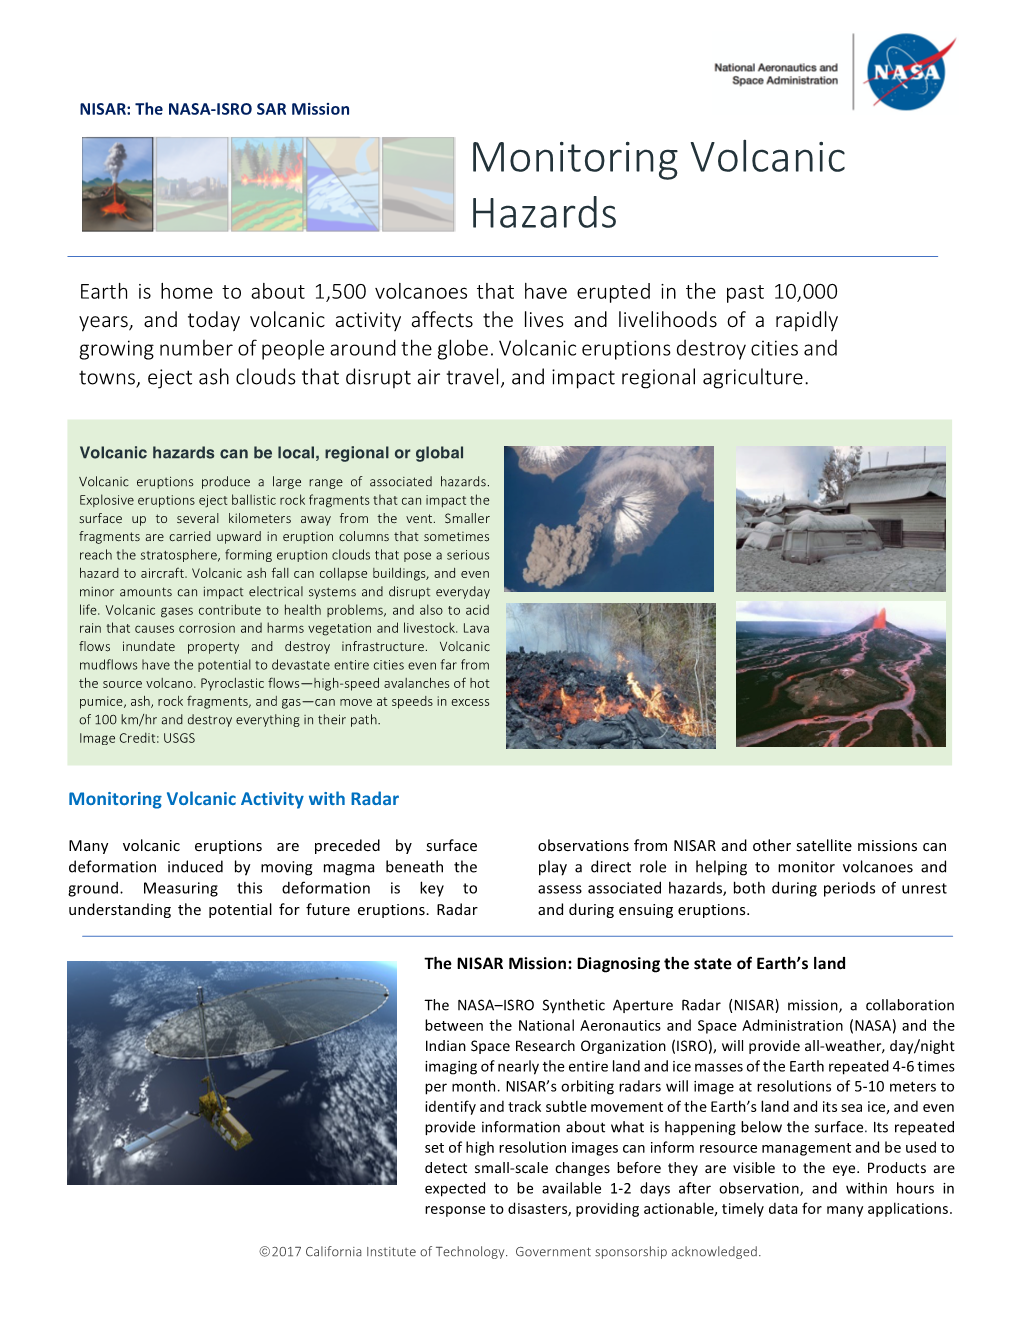 Volcanic Hazards Can Be Local, Regional Or Global Volcanic Eruptions Produce a Large Range of Associated Hazards